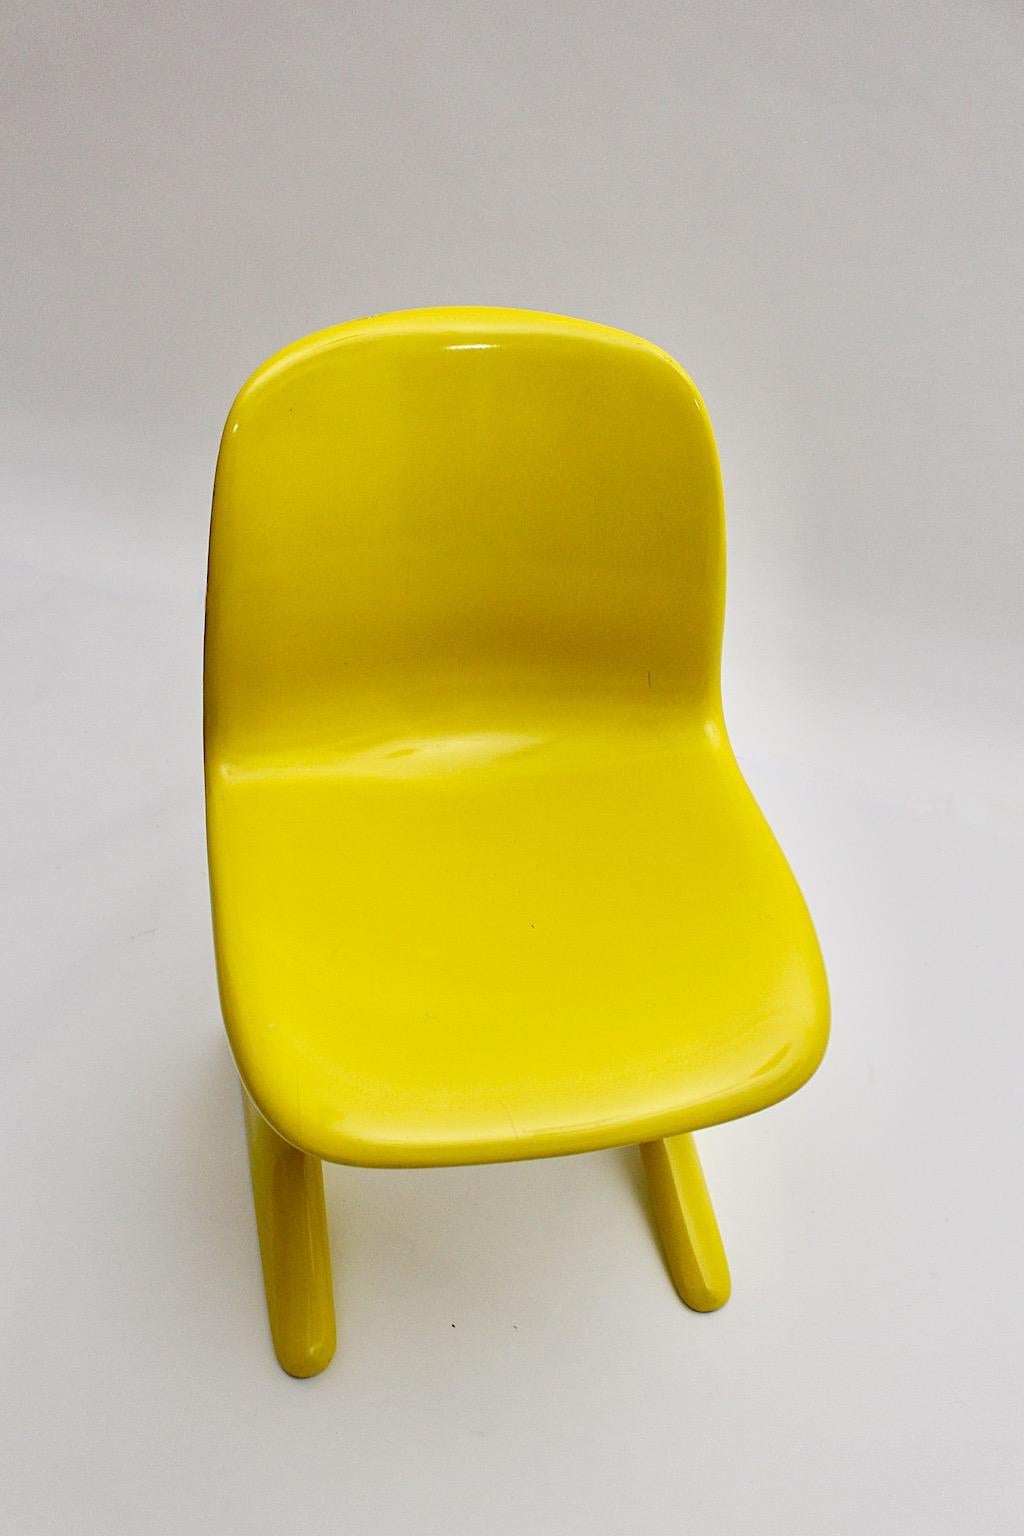 Space Age Vintage Yellow Plastic Chair Kangaroo Chair Ernst Moeckl 1960s Germany For Sale 2